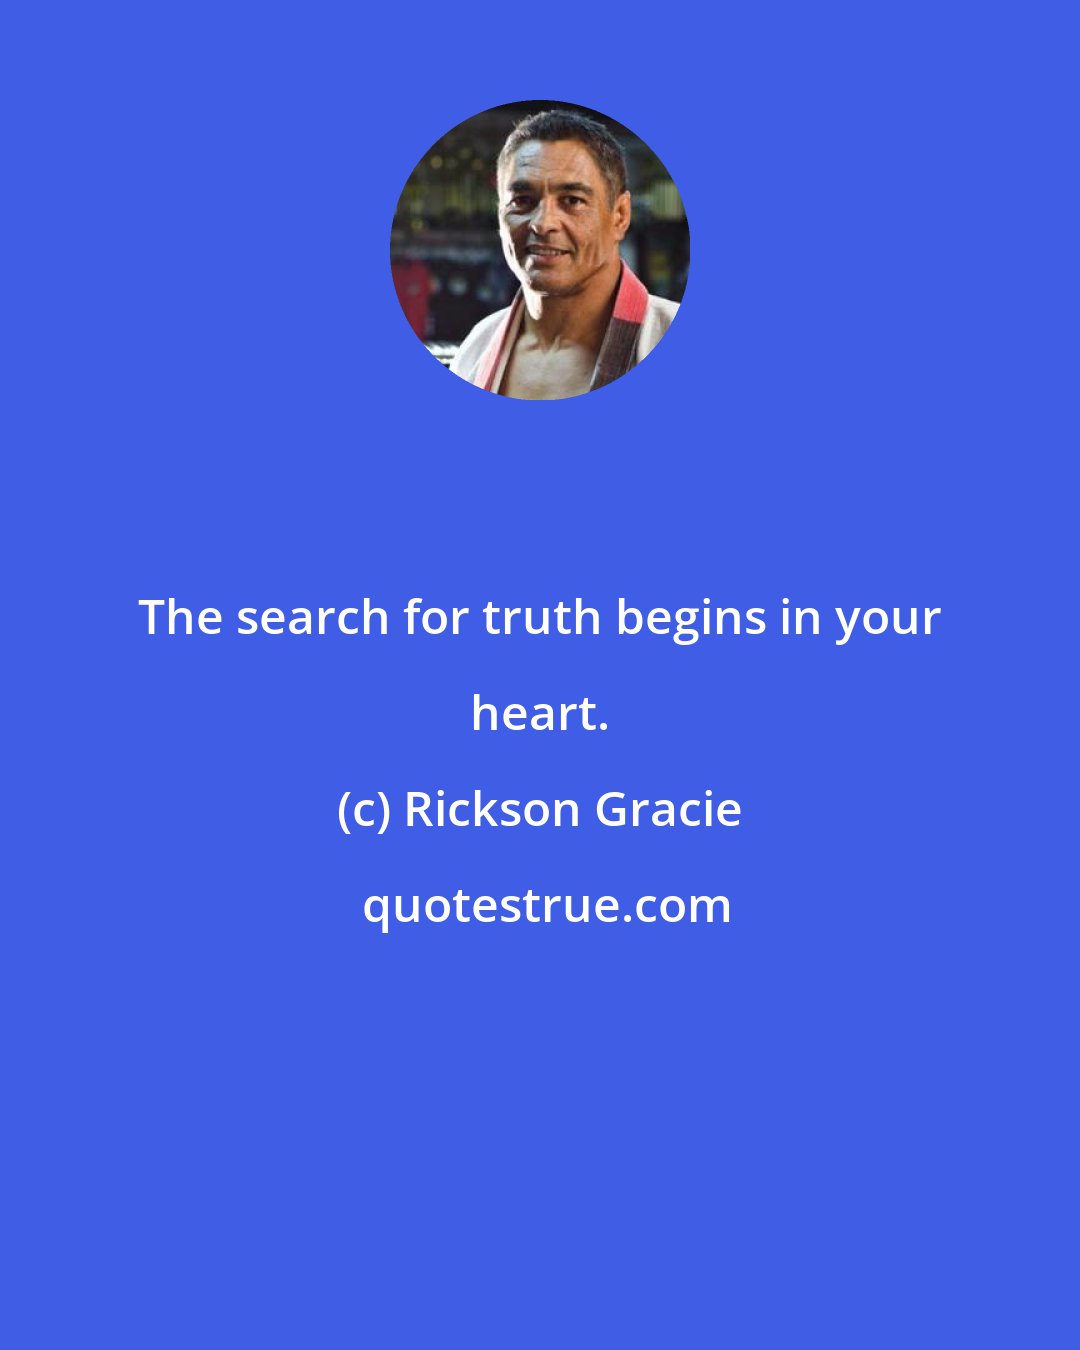 Rickson Gracie: The search for truth begins in your heart.